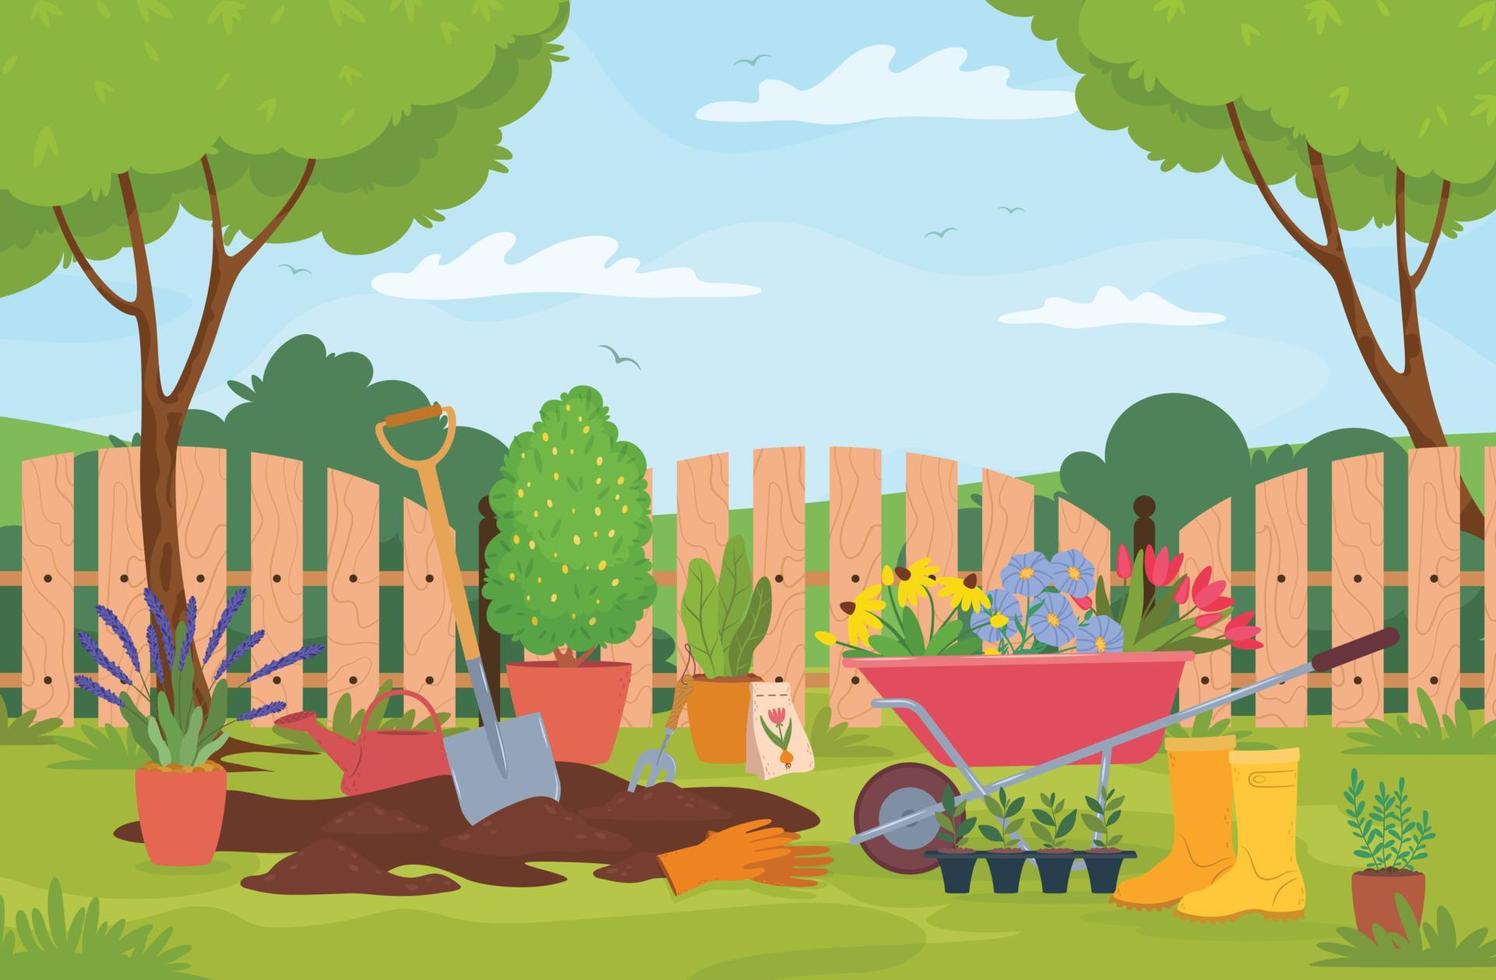 Garden landscape with plants, trees, fence and gardening tools. Wheelbarrow with flowers, plant seeds, shovel. Spring garden vector illustration